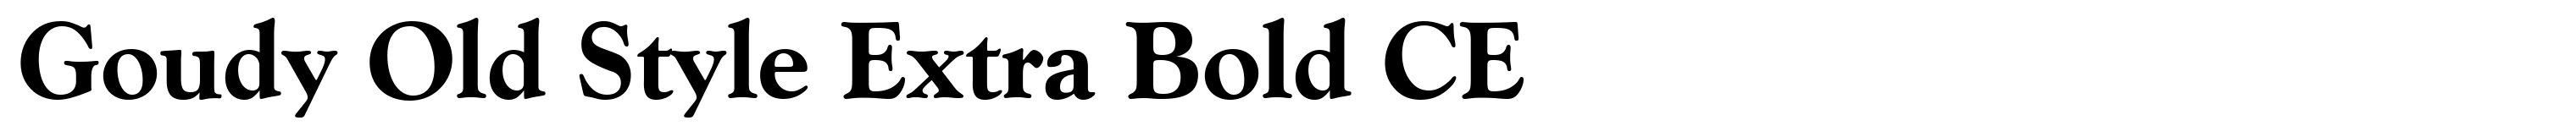 Goudy Old Style Extra Bold CE